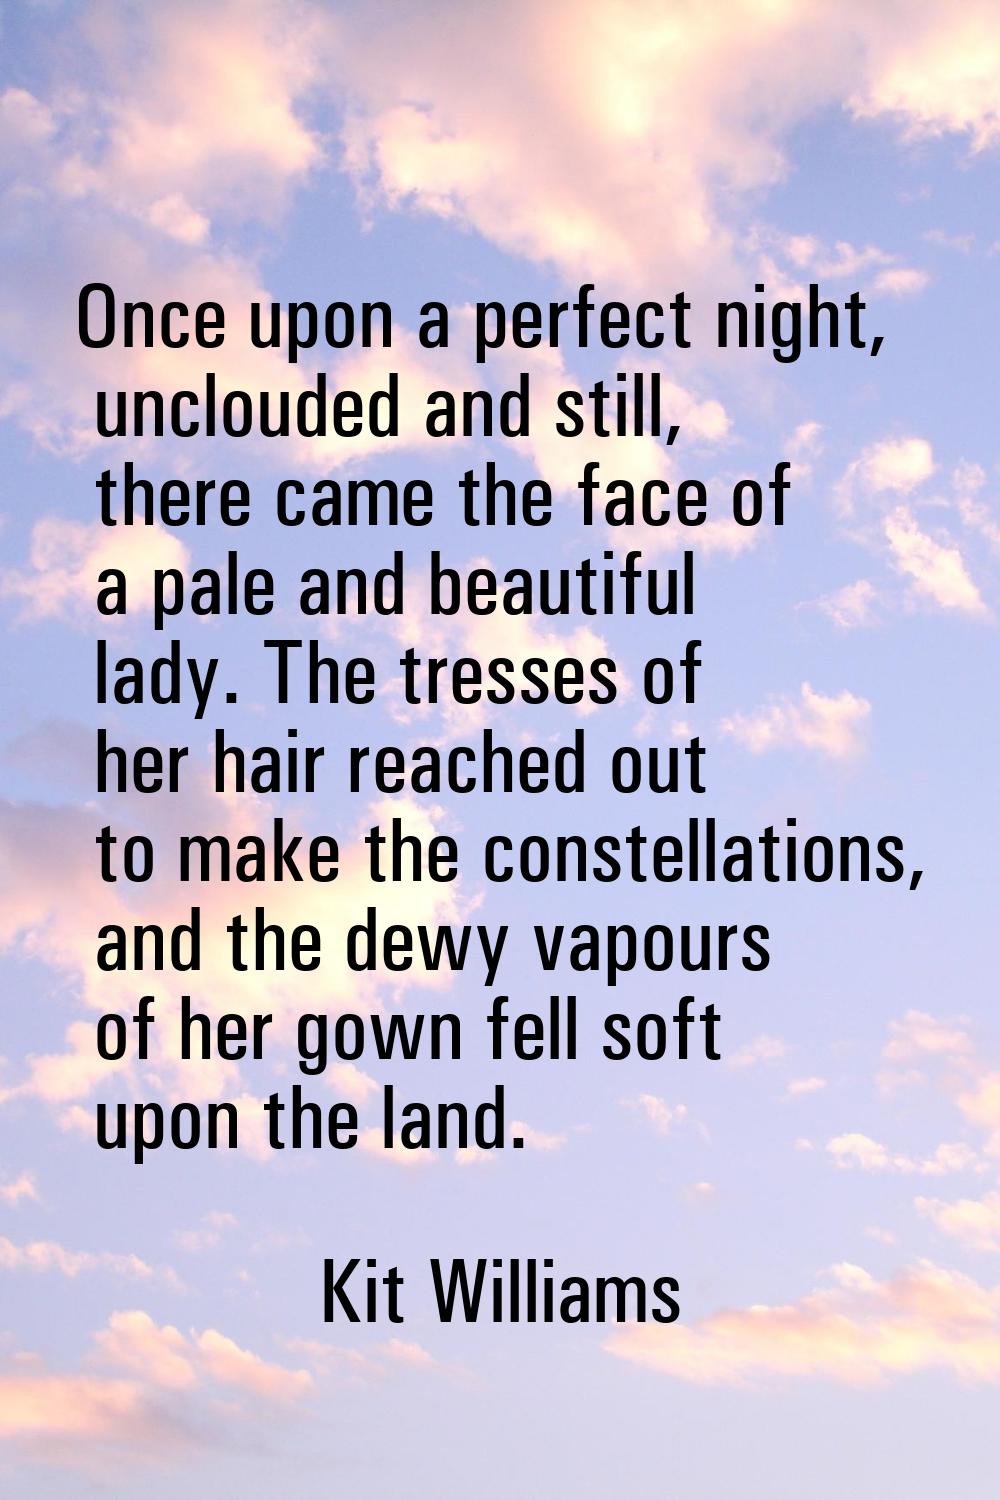 Once upon a perfect night, unclouded and still, there came the face of a pale and beautiful lady. T